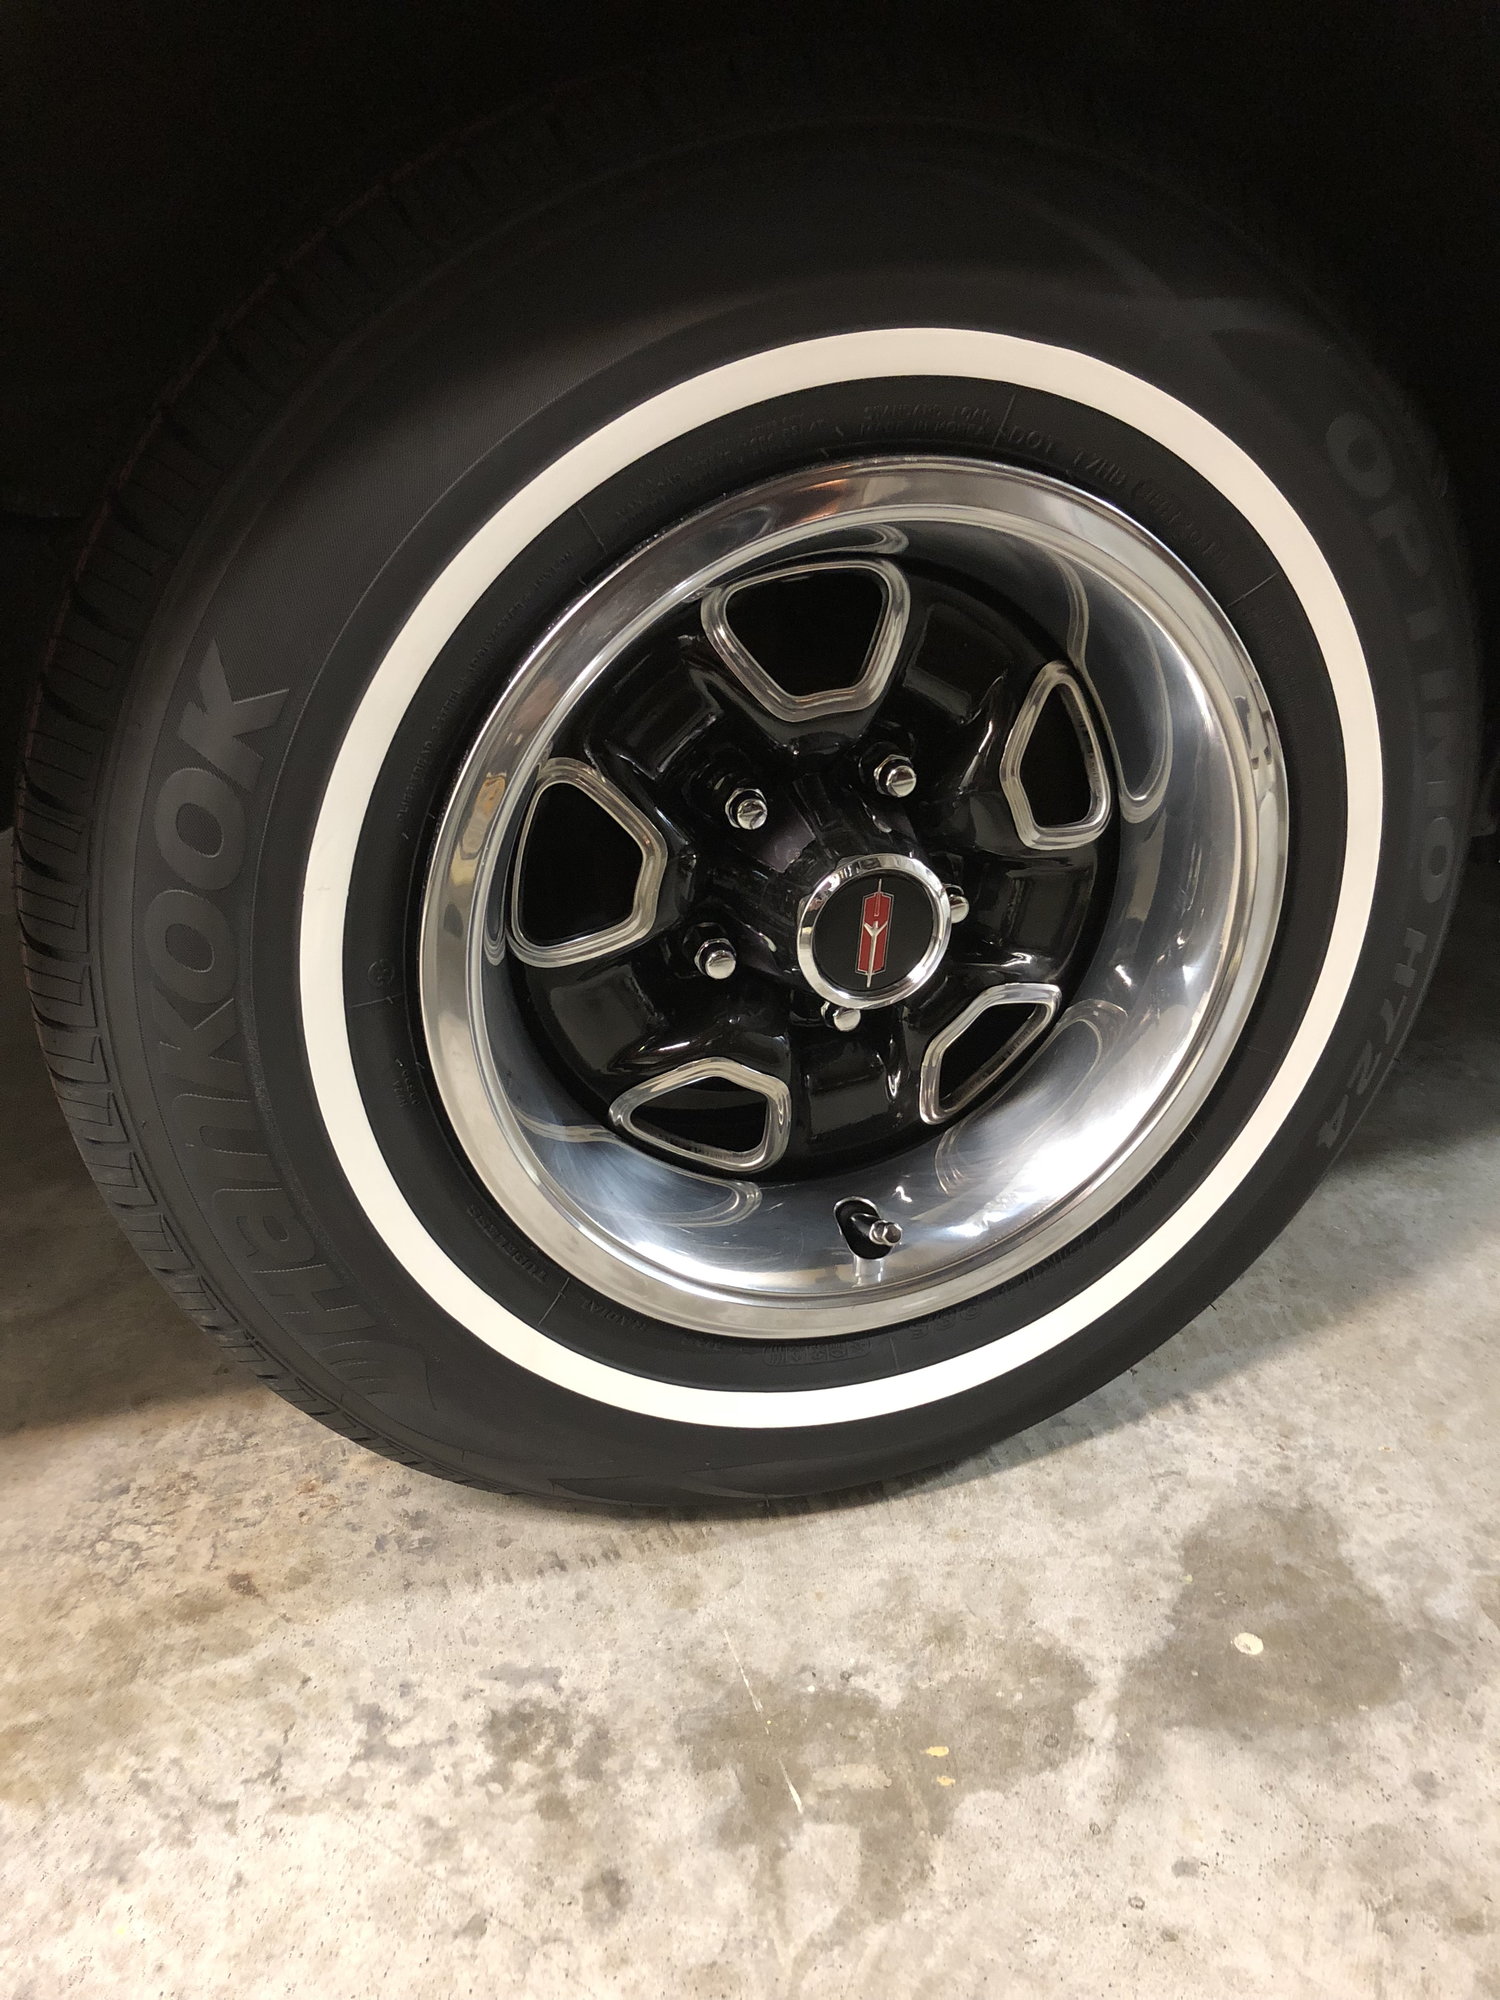 New Wheels & Tires For My 1973 Oldsmobile Cutlass Supreme